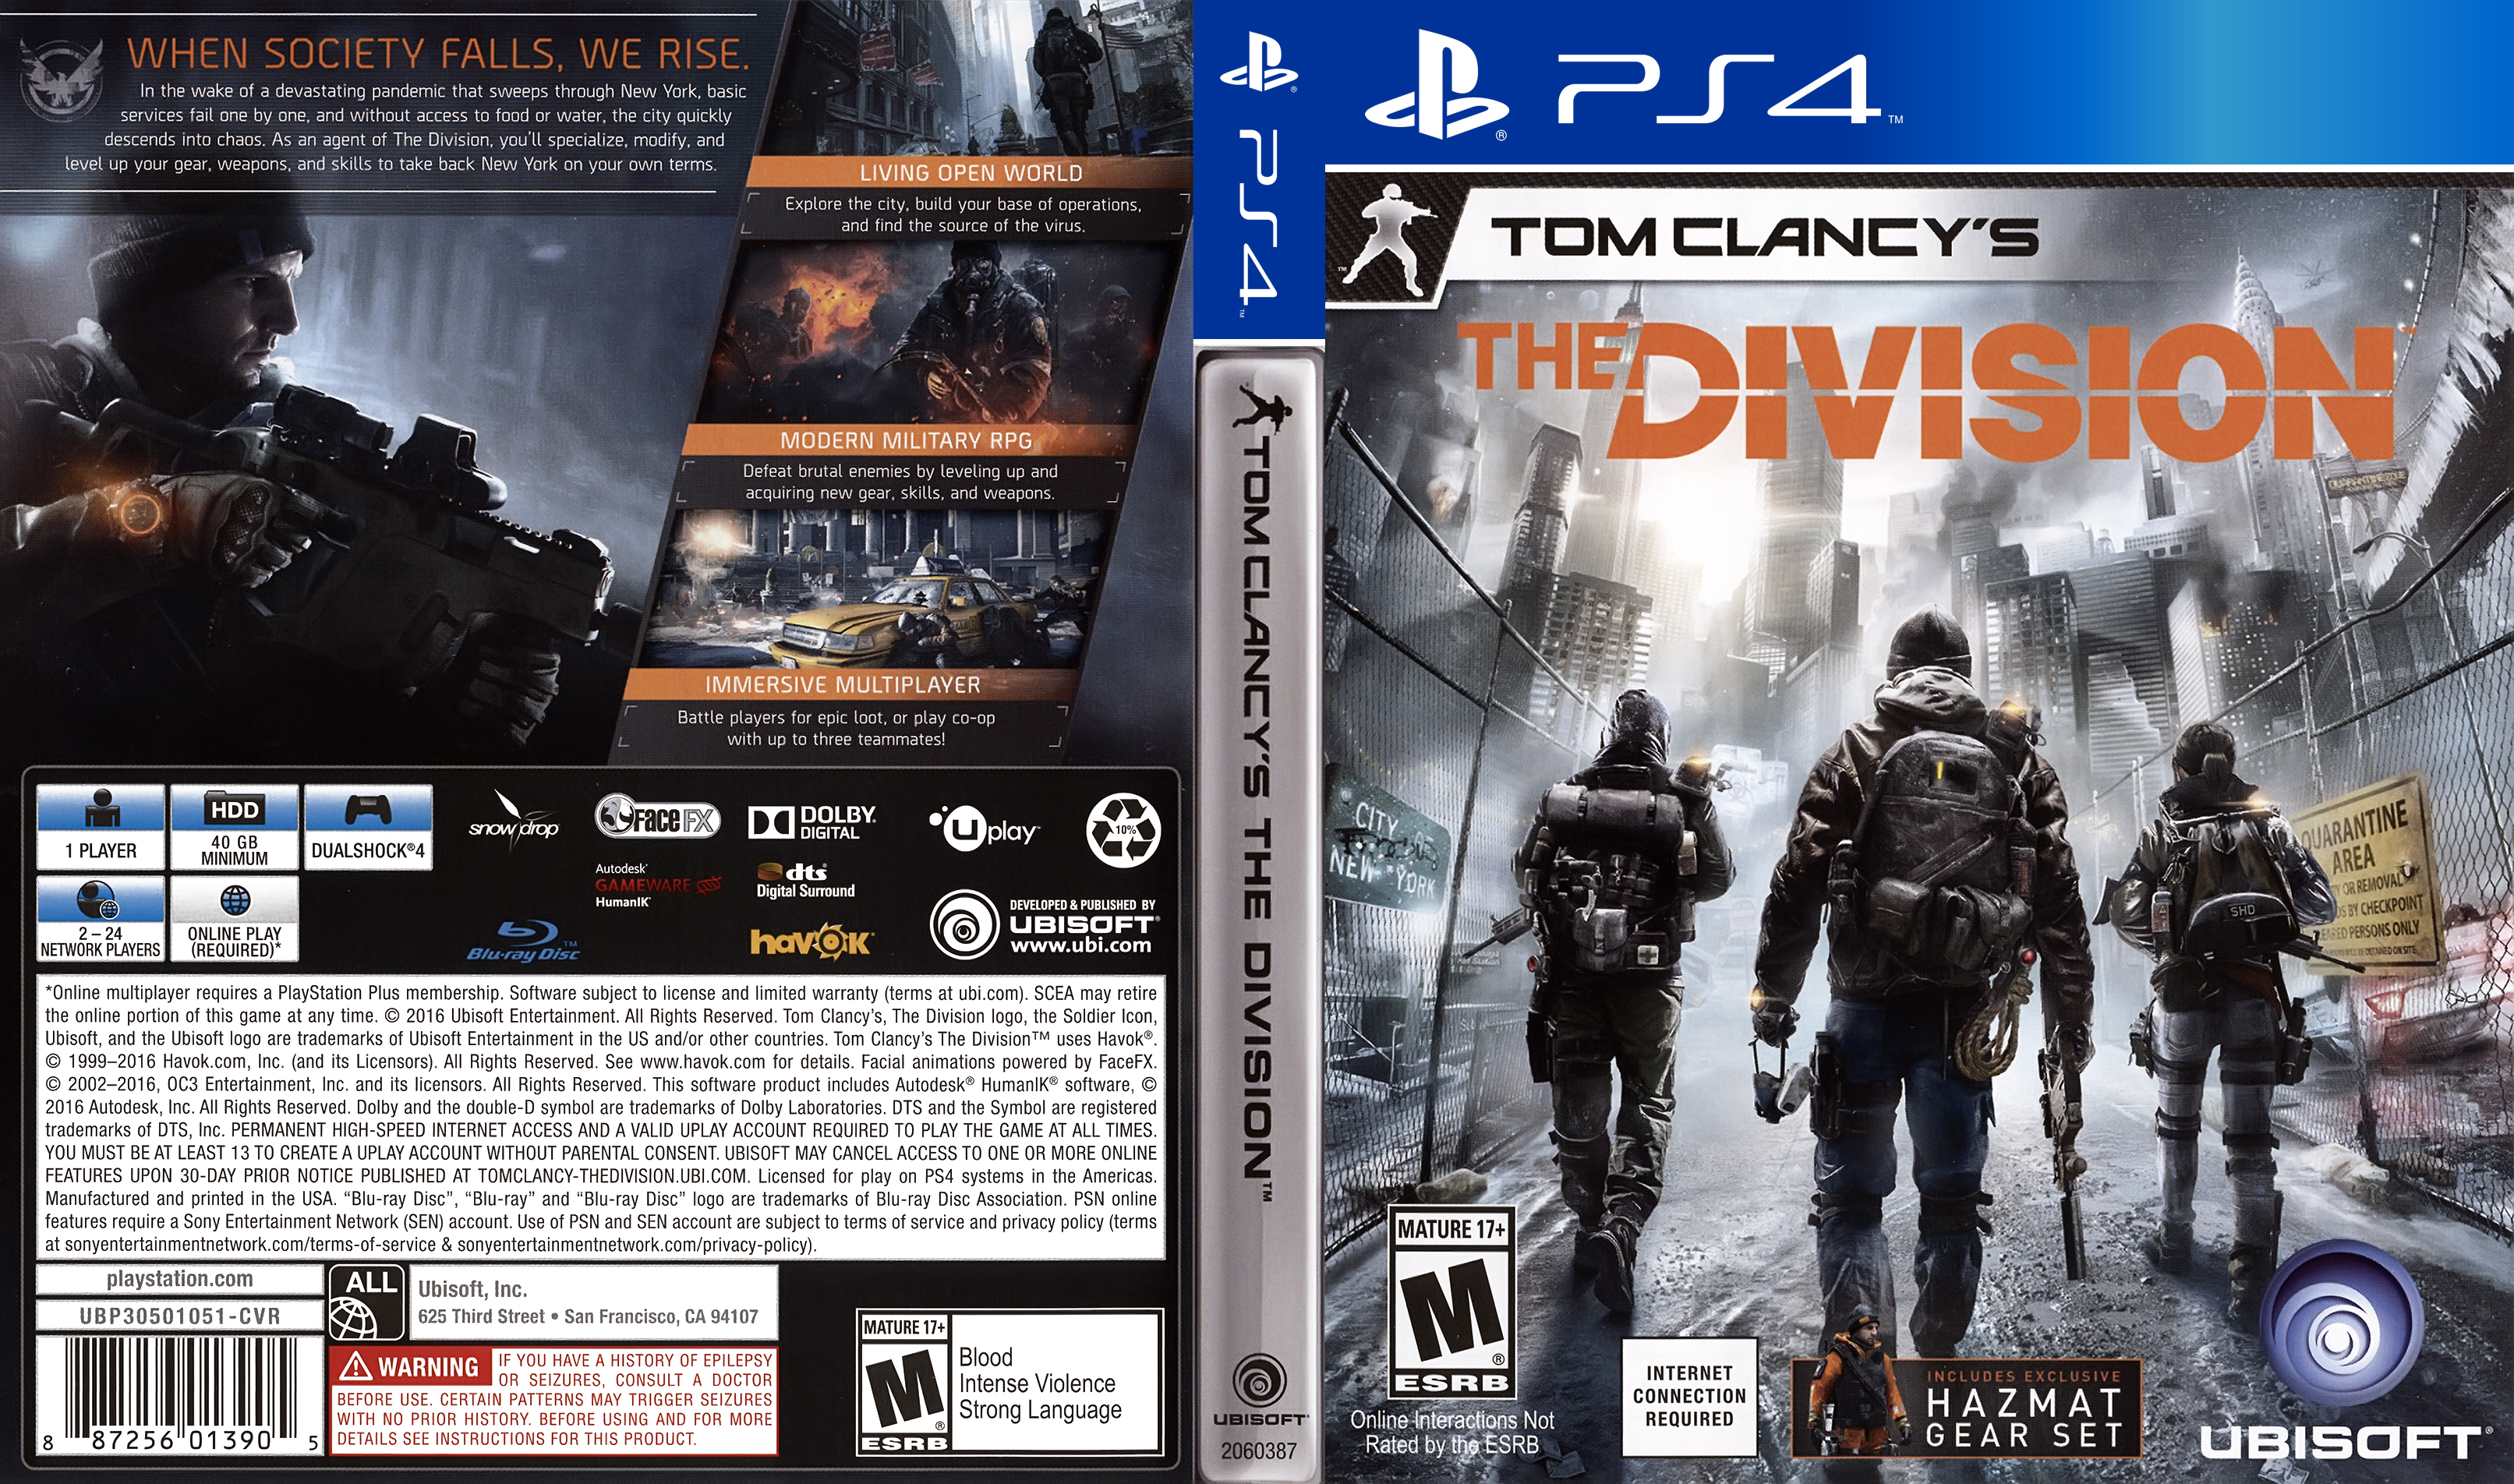 The division ps4. Дивижн ps4. Дивижон 2 ПС 4. Tom Clancy's the Division ps4]. Tom Clancy's the Division ps4 обложка.